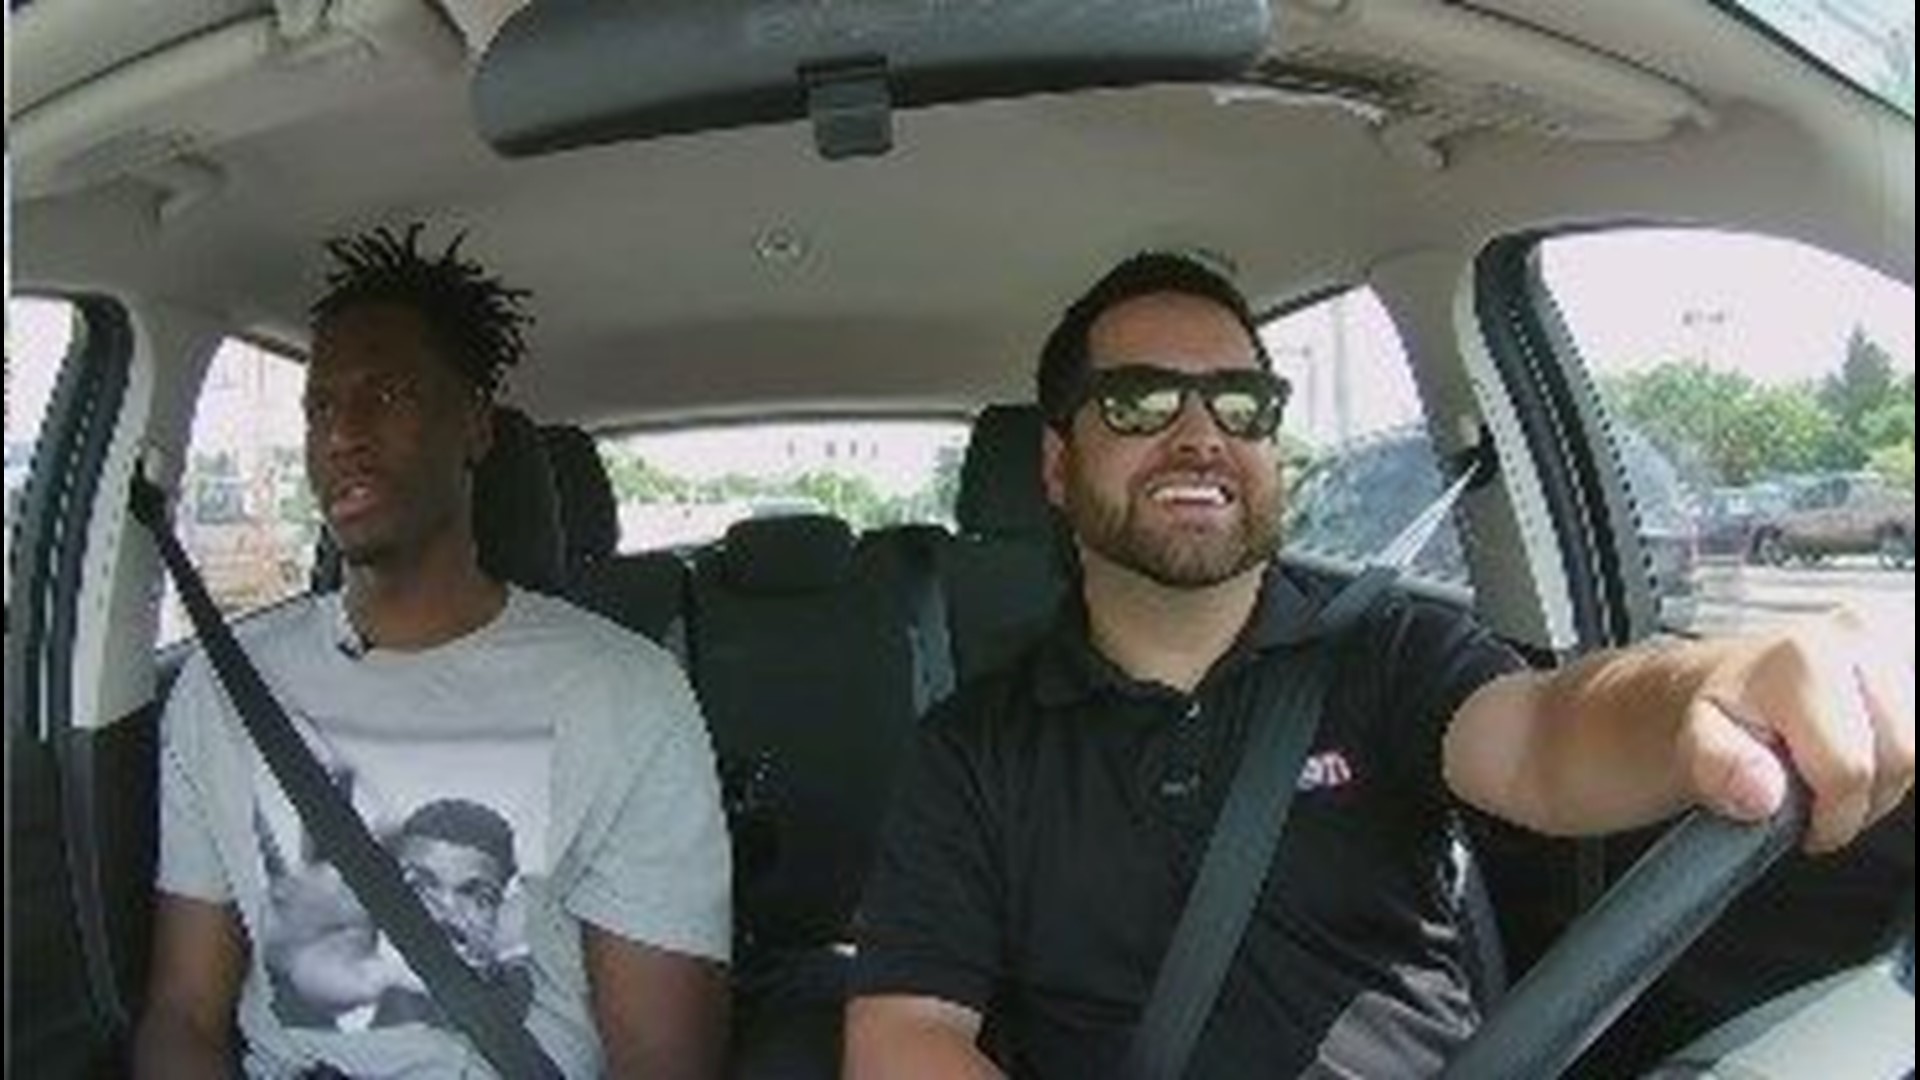 Nigel Hayes takes a ride, plays HORSE with Jordan Strack